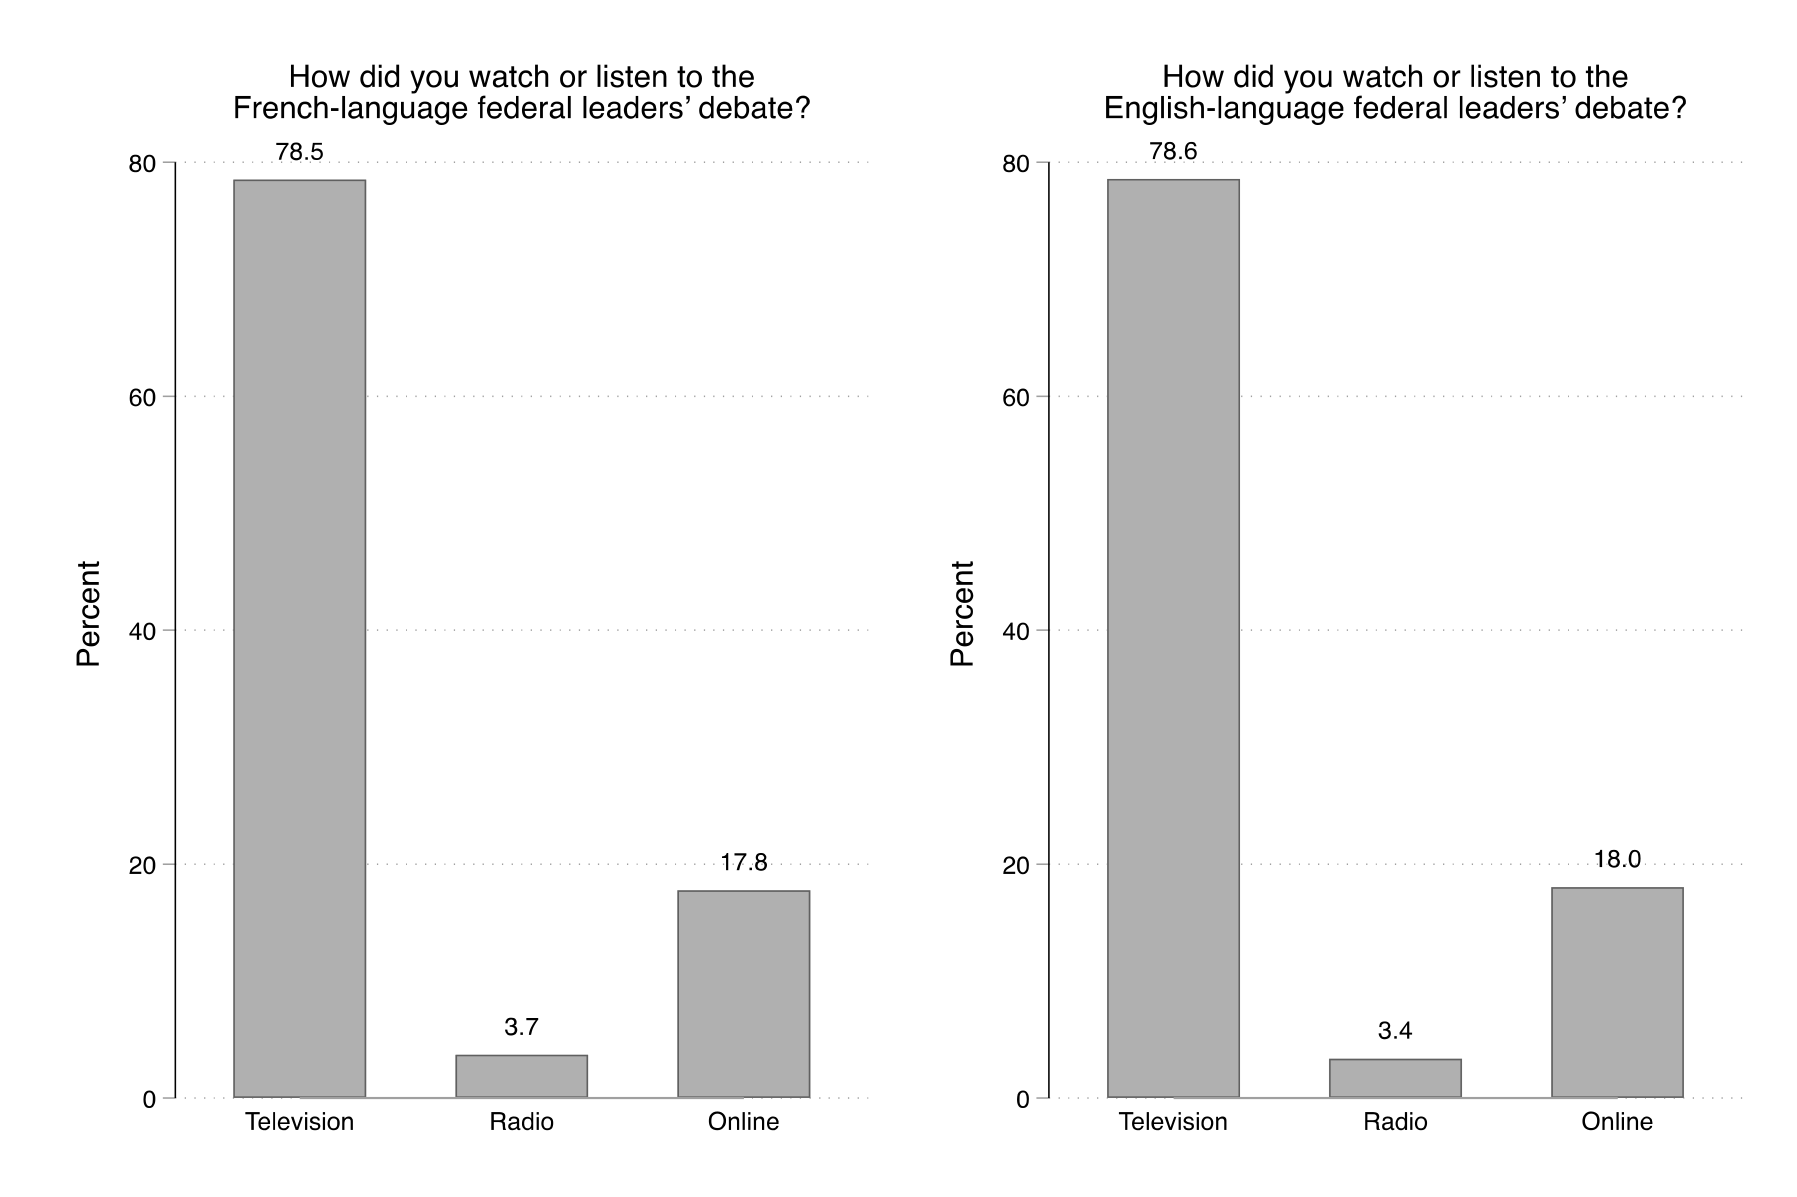 Figure 10. This figure shows which media participants used to watch or listen to the debates. For both the English and French debates, over 75% watched on television, 18% watched online, and 3-4% listened on the radio.